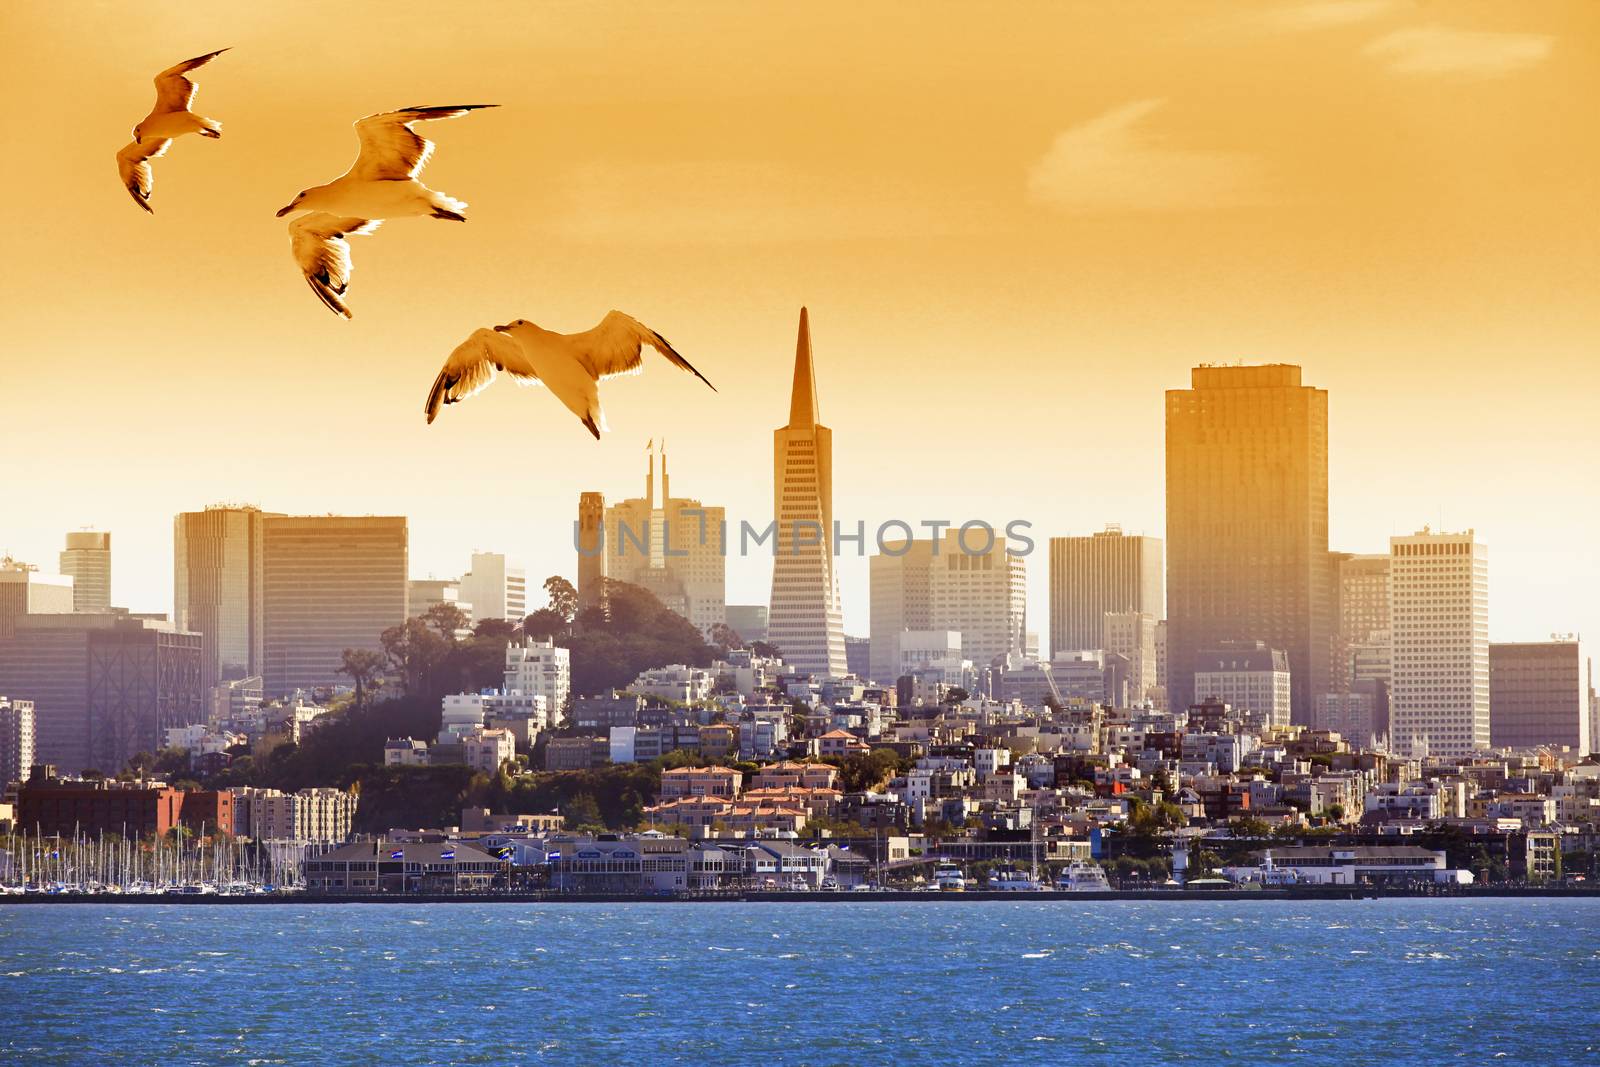 Seagulls flying over the bay on the background of San Francisco